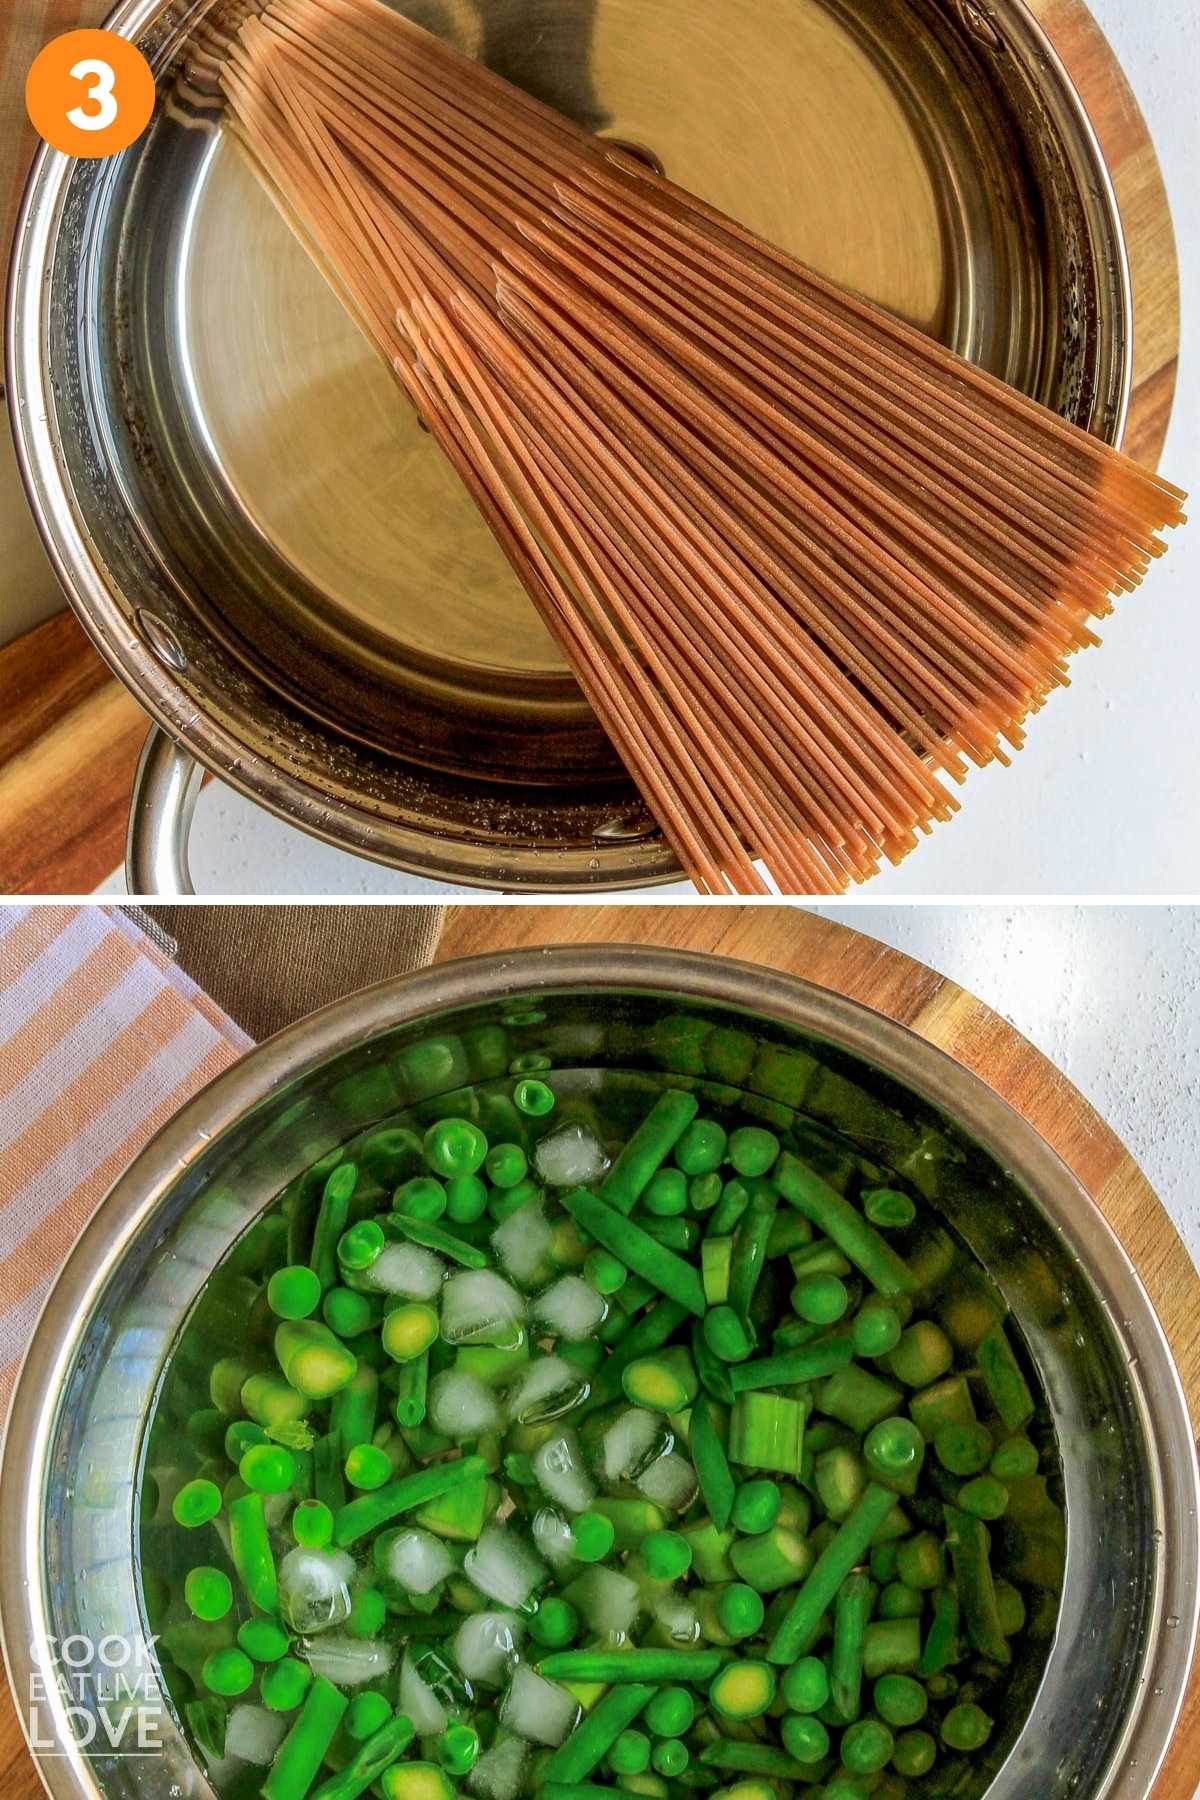  A collage of noodles added to a pot of water and green veggies in ice water.